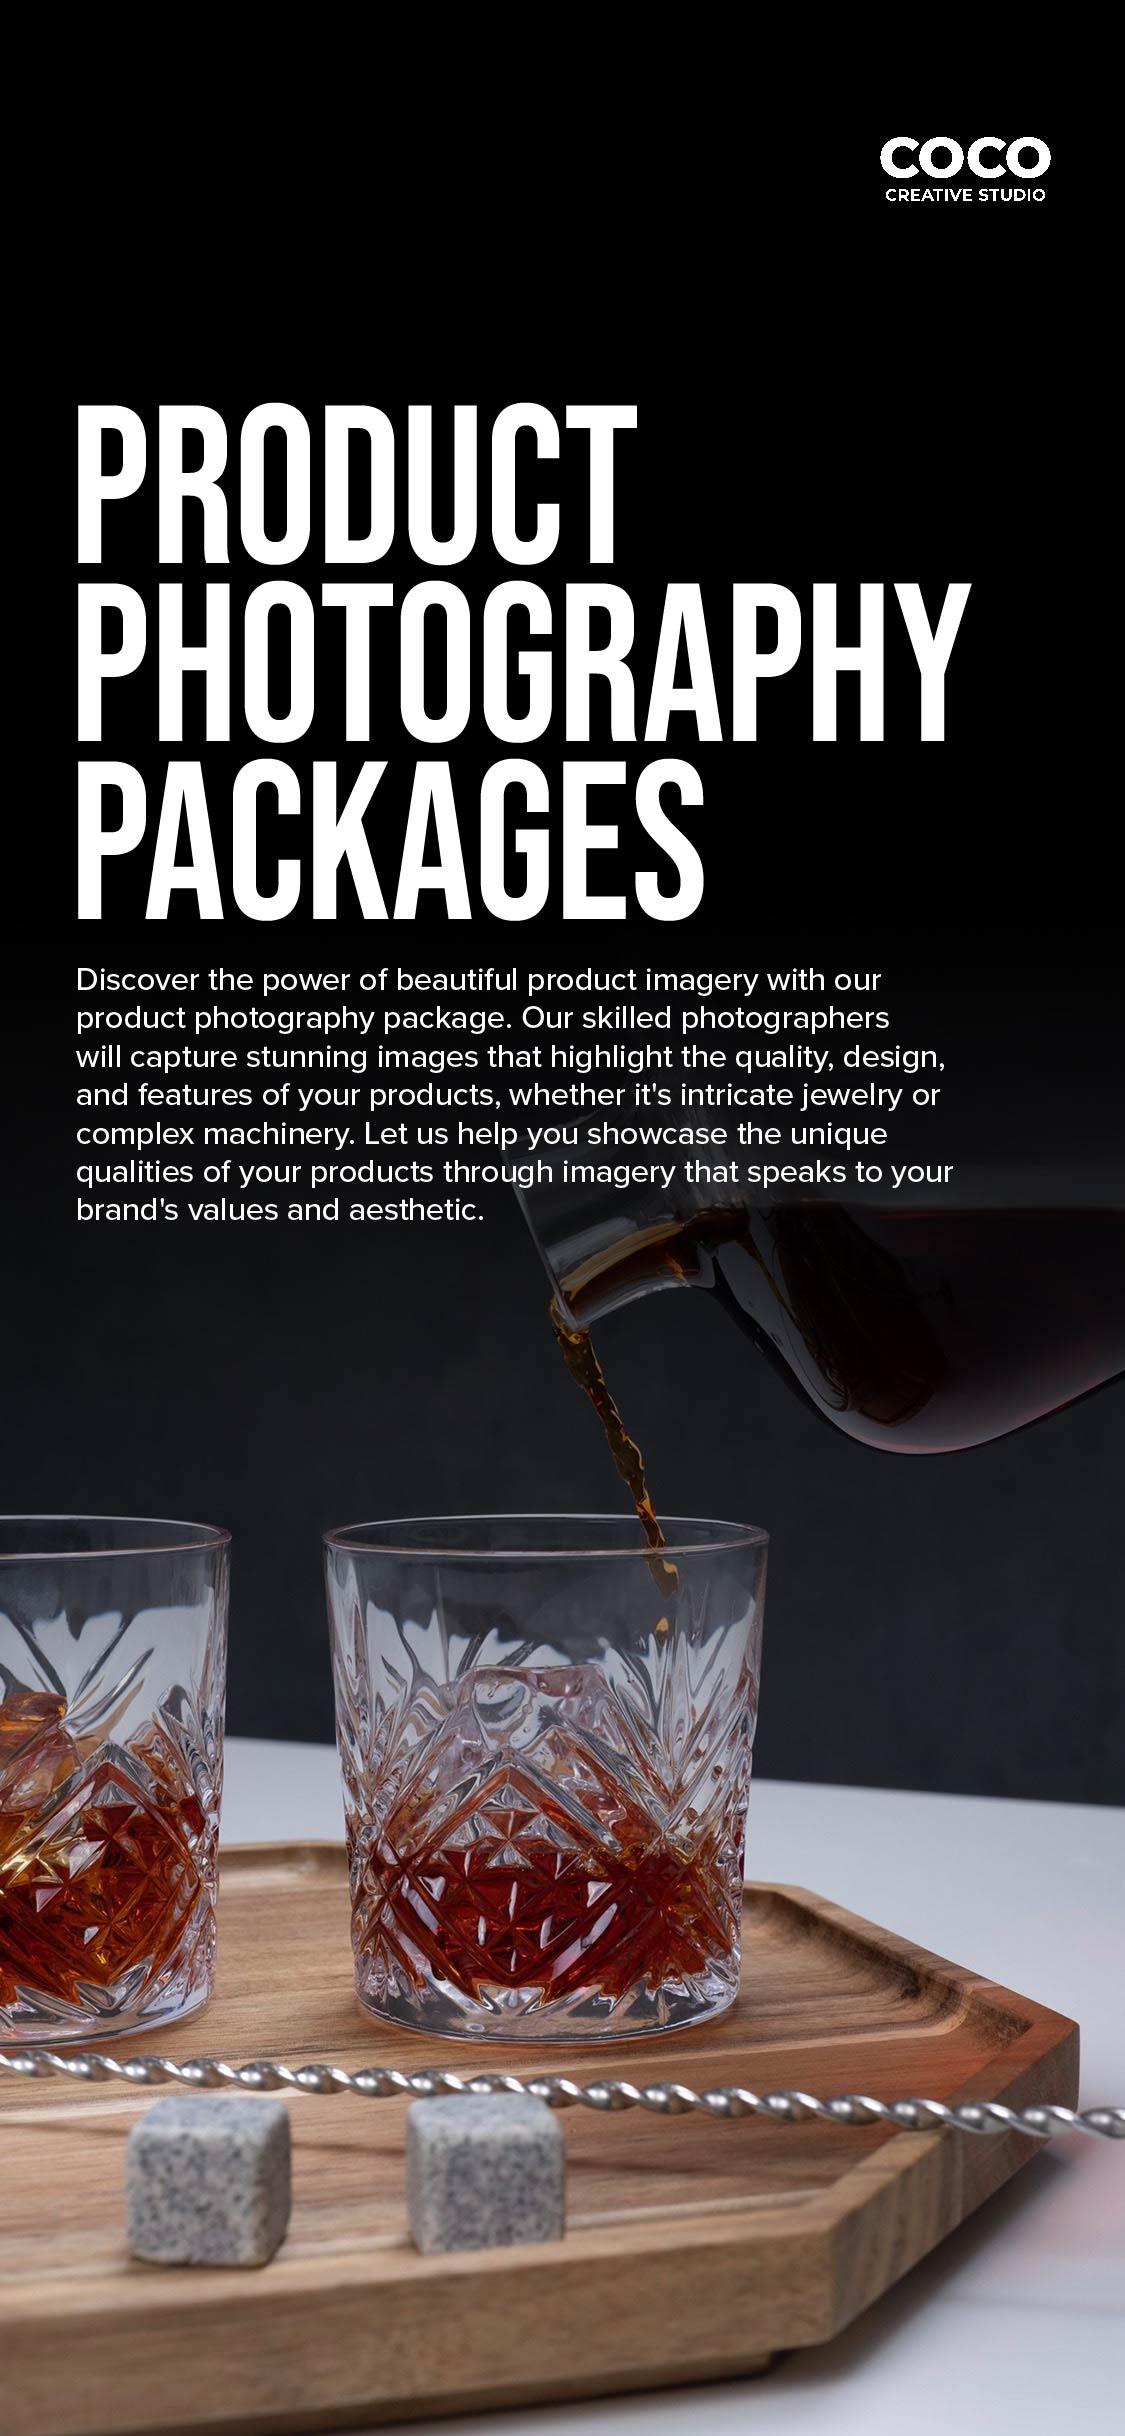 COCO Creative Studio - Product Photography Rate Card 1